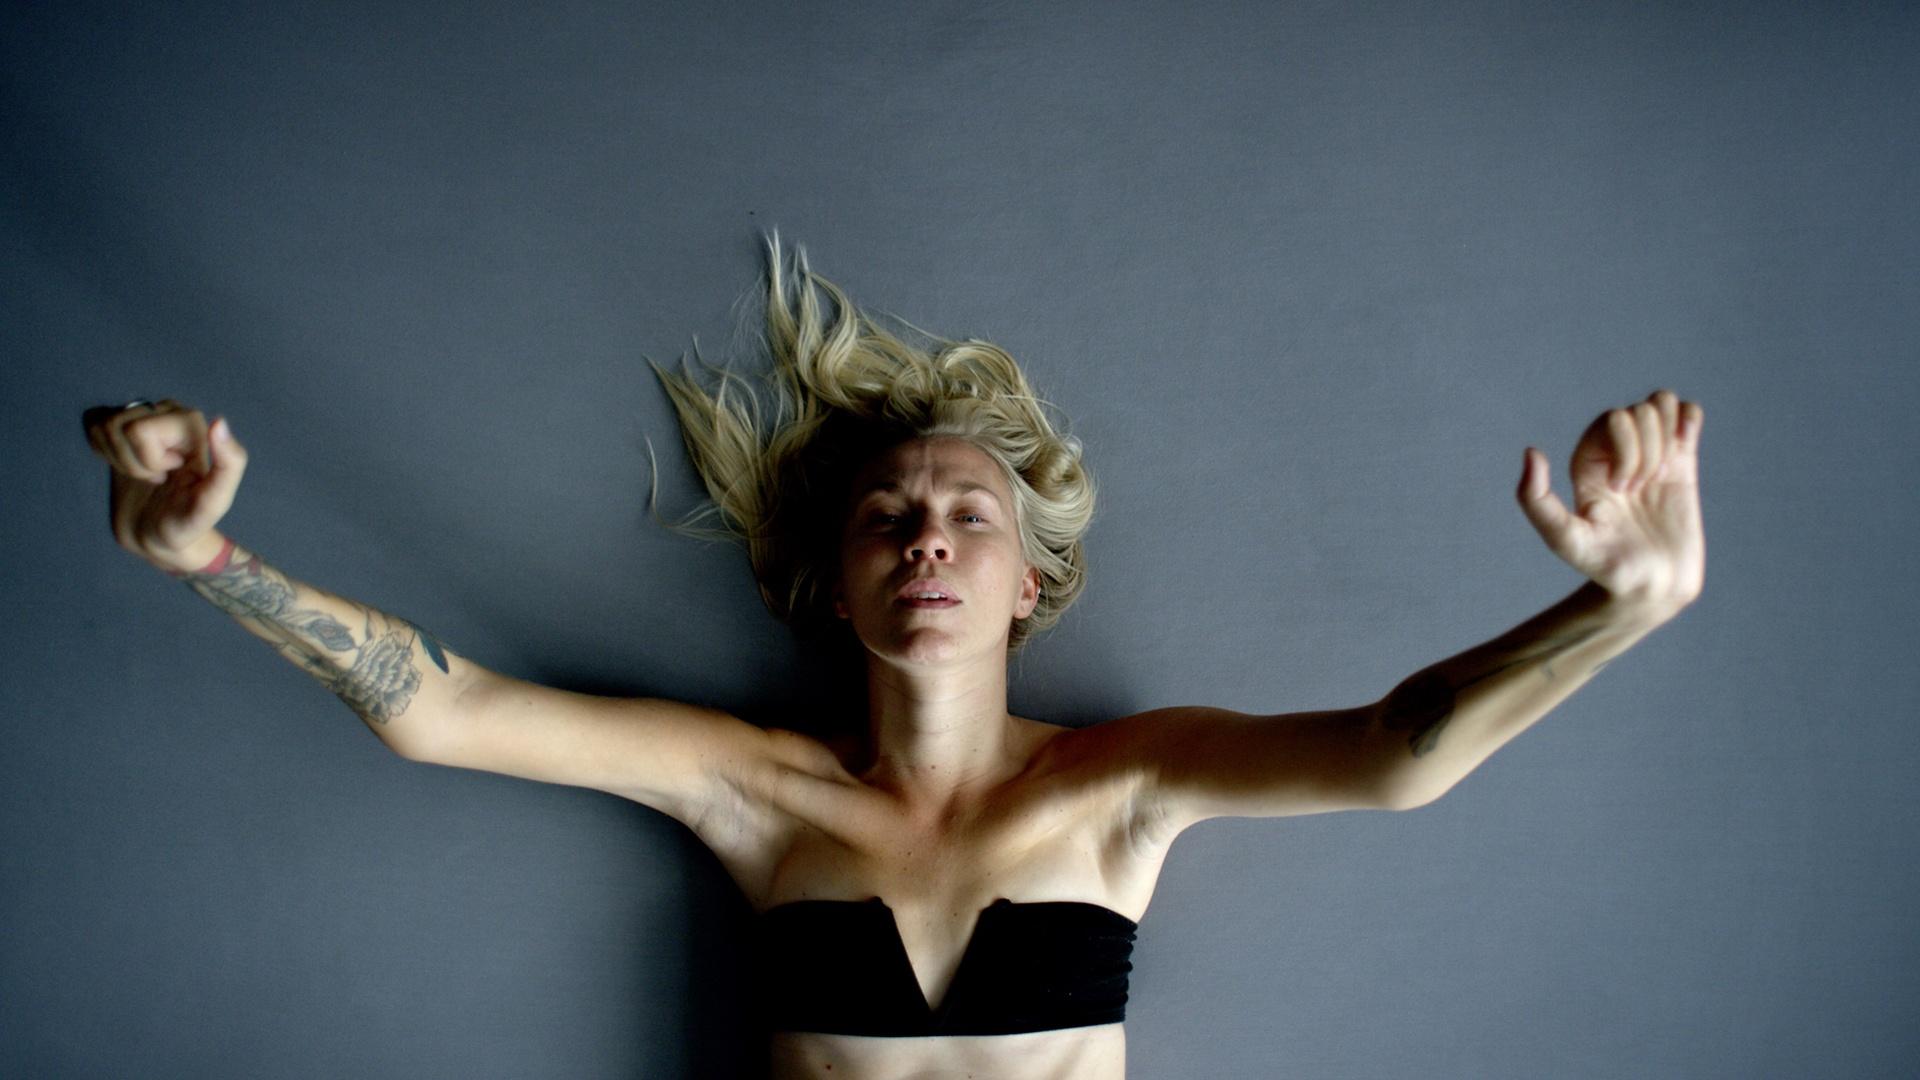 A woman lies on a gray background with her arms outstretched, reaching up towards the camera above her